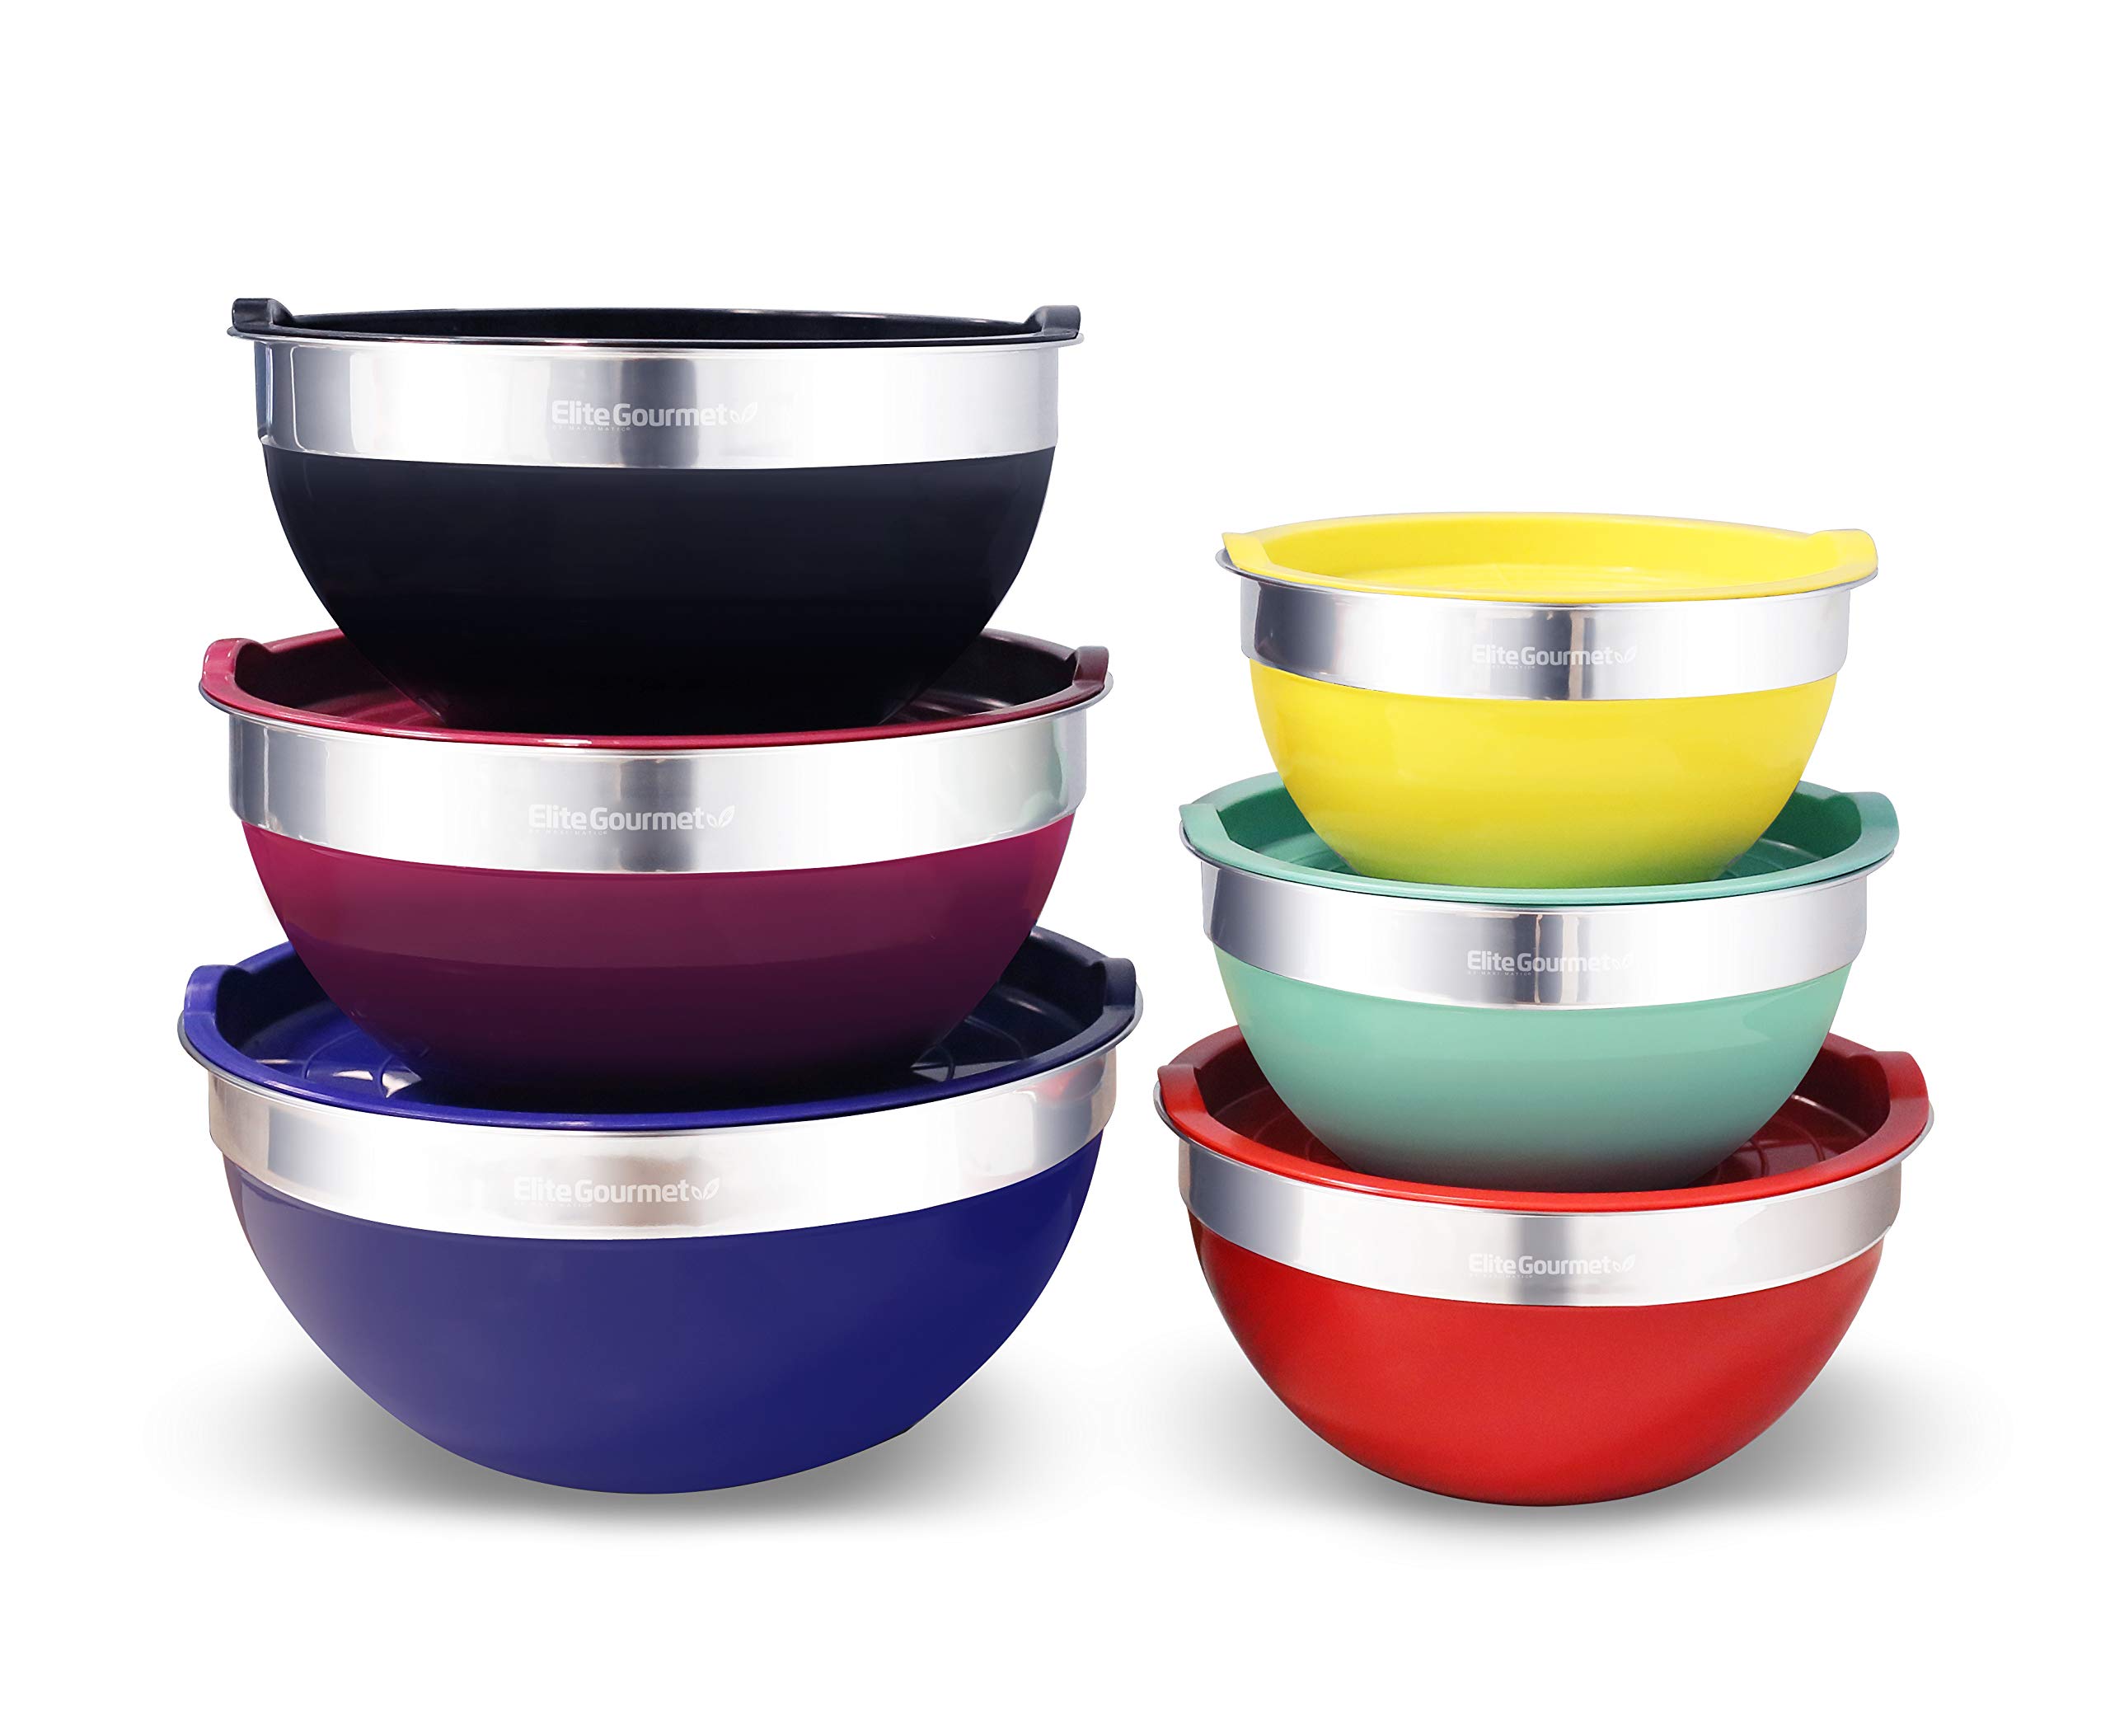 Elite Gourmet by EBS-0012 12-Piece Stainless Steel Interior Colored Stackable Nesting Mixing Bowls with Airtight Lids (Set of 6) Space Saving Food Storage, Baking, Melting Chocolate, Multi-Colors